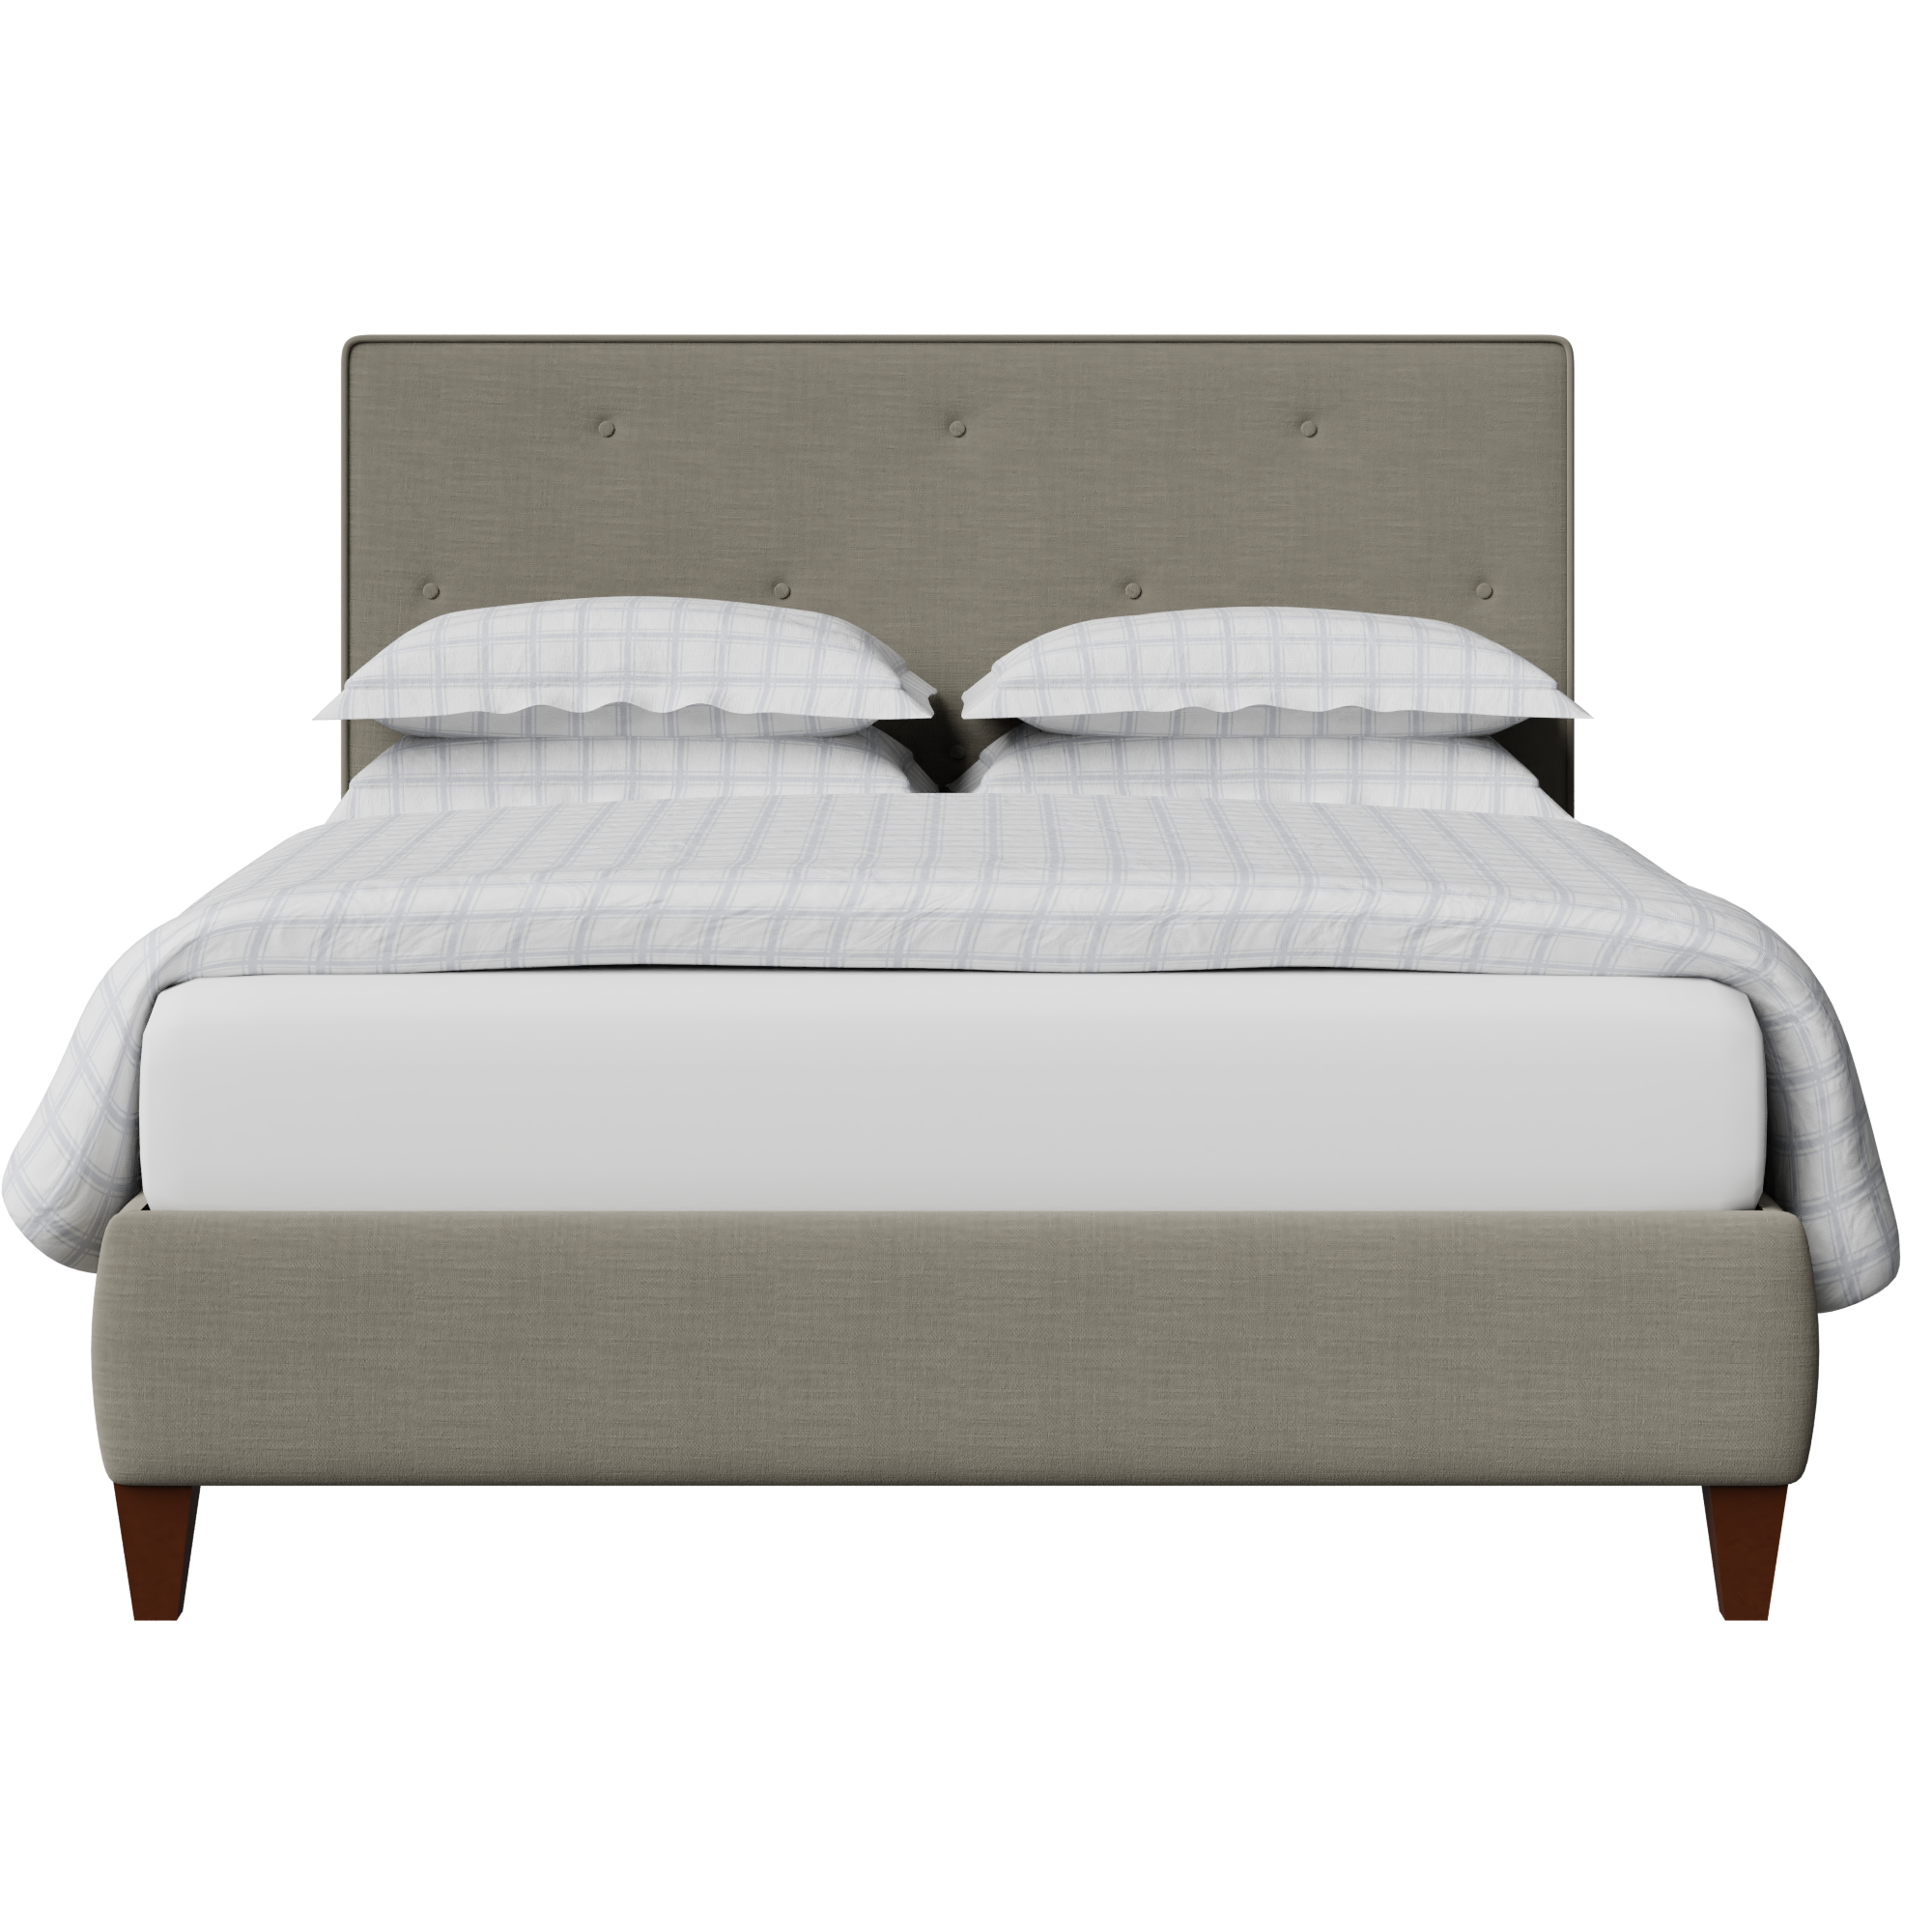 Yushan Buttoned Diagonal upholstered bed in grey fabric